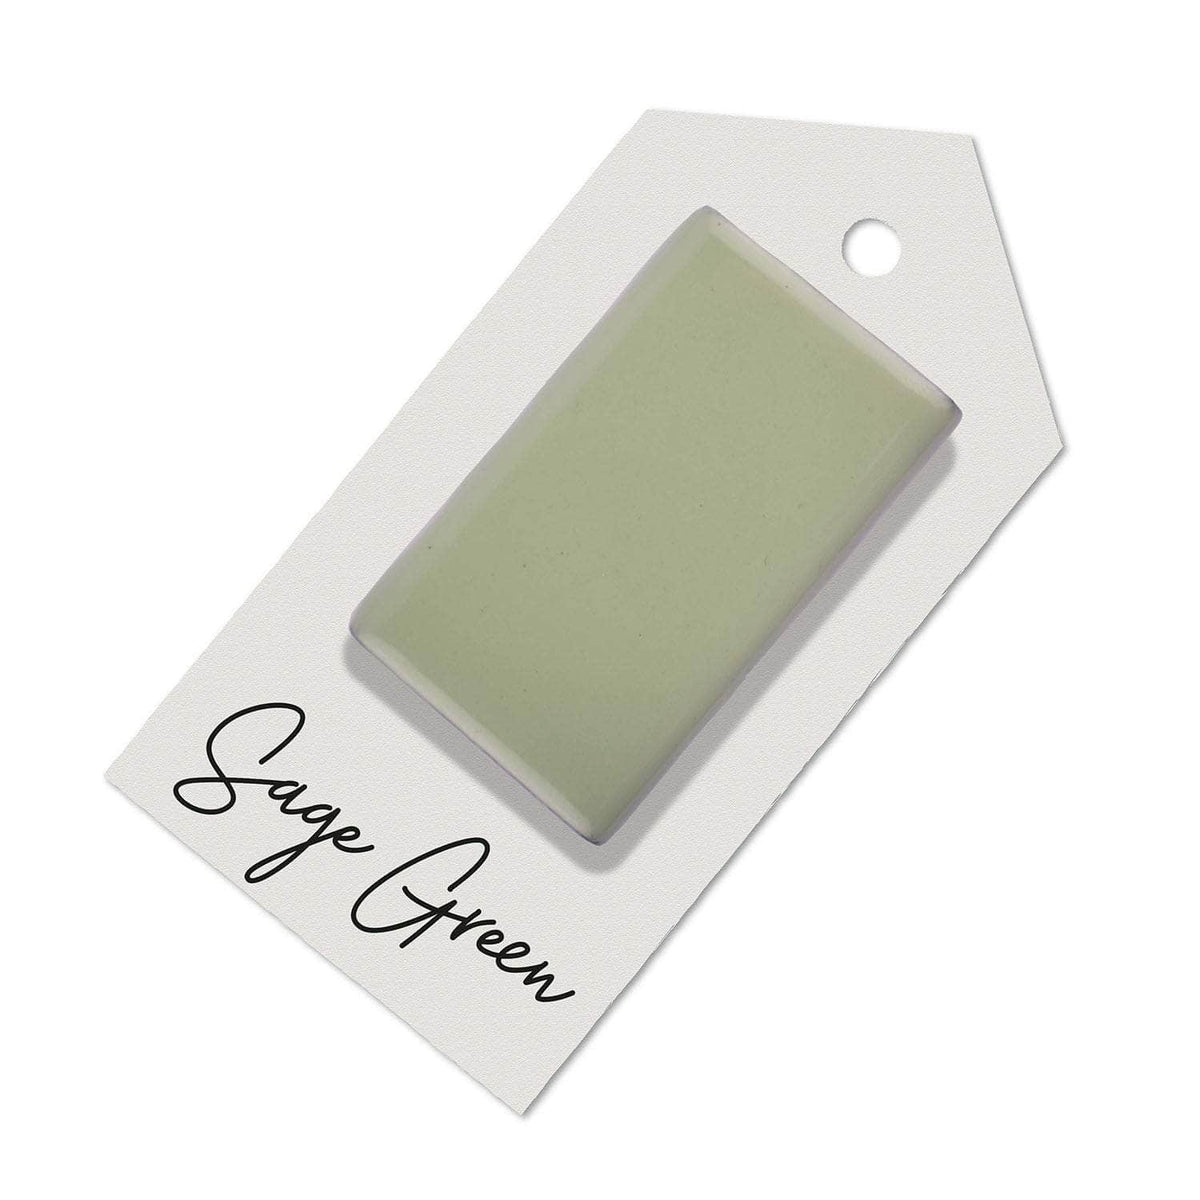 Sage green sample for Aga range cooker re-enamelling &amp; reconditioned cookers